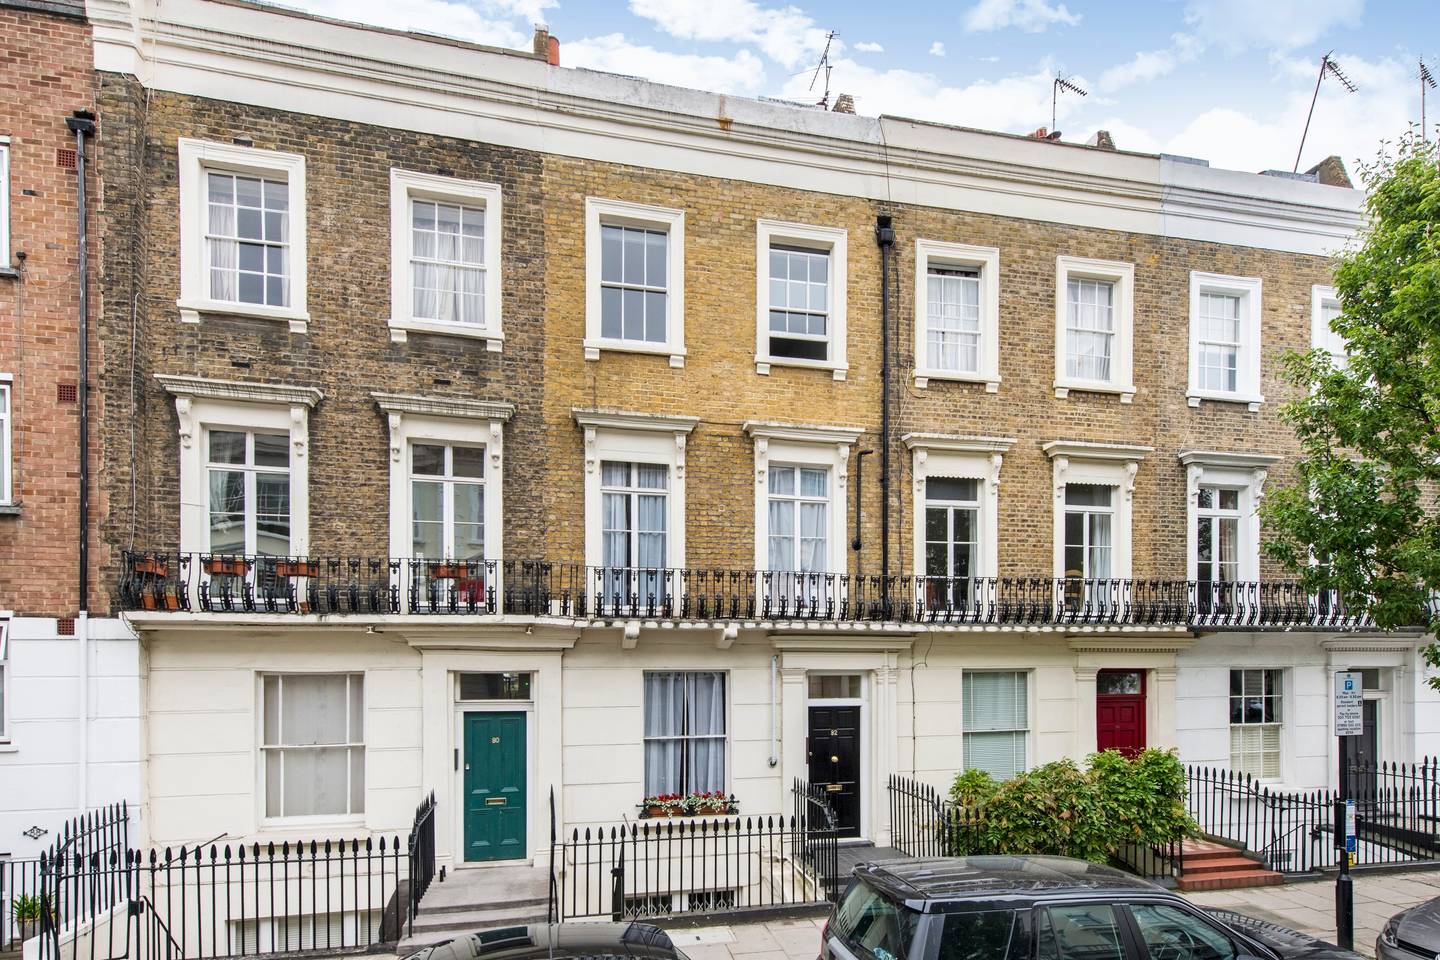 Property Image 2 - Long stay discounts - Delightful 1-bed, Pimlico